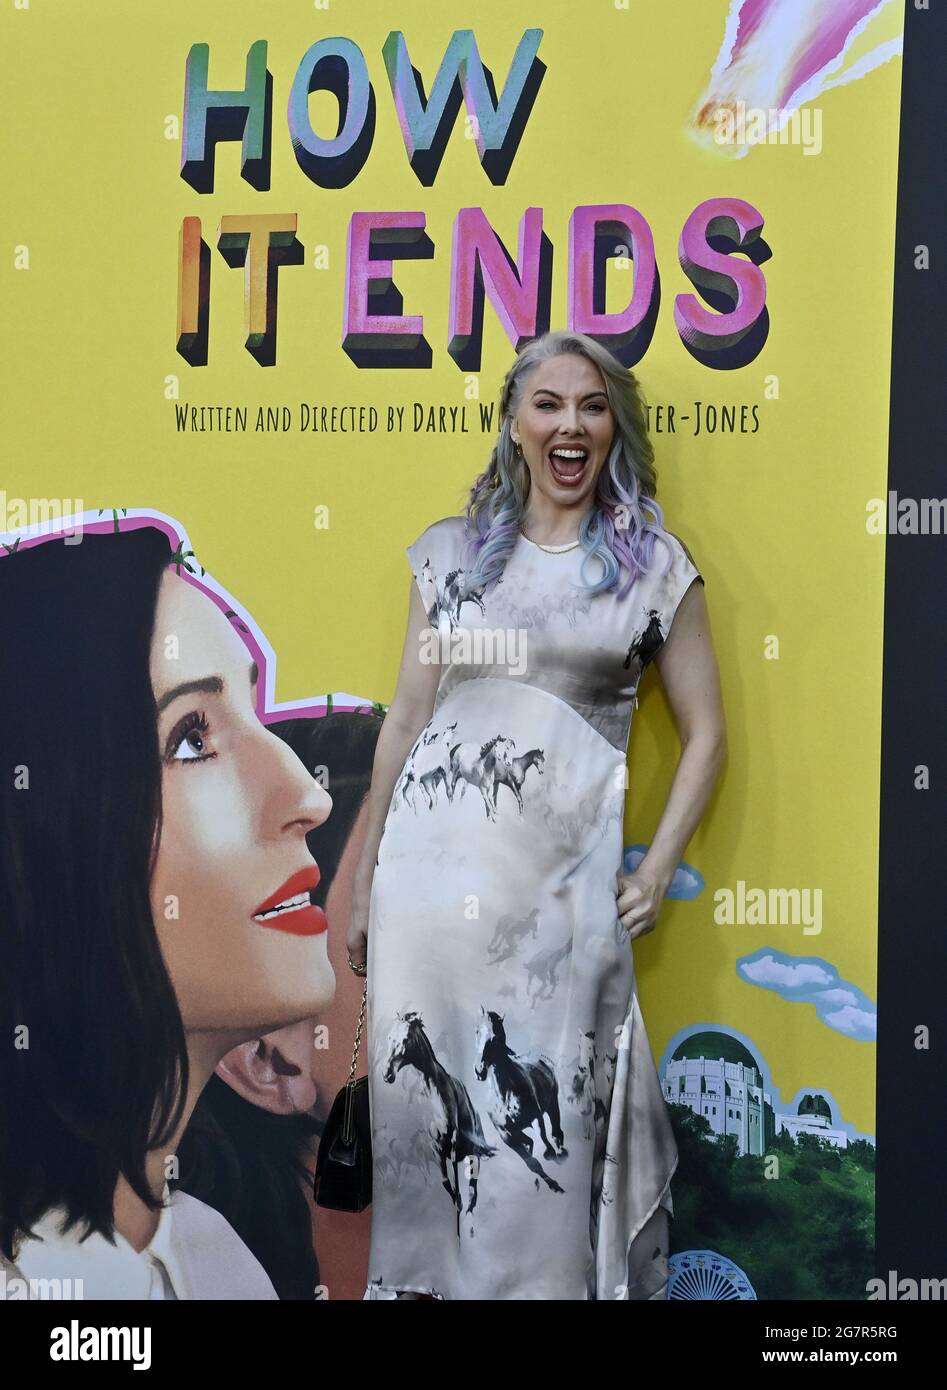 Los Angeles, United States. 16th July, 2021. Cast member Whitney Cummings attends the premiere of the motion picture comedy 'How It Ends' at NeueHouse in Los Angeles on Thursday, July 15, 2021. Storyline: In this feel-good apocalyptic comedy, Liza (Zoe Lister-Jones) embarks on a hilarious journey through LA in hopes of making it to her last party before it all ends, running into an eclectic cast of characters along the way. Photo by Jim Ruymen/UPI Credit: UPI/Alamy Live News Stock Photo